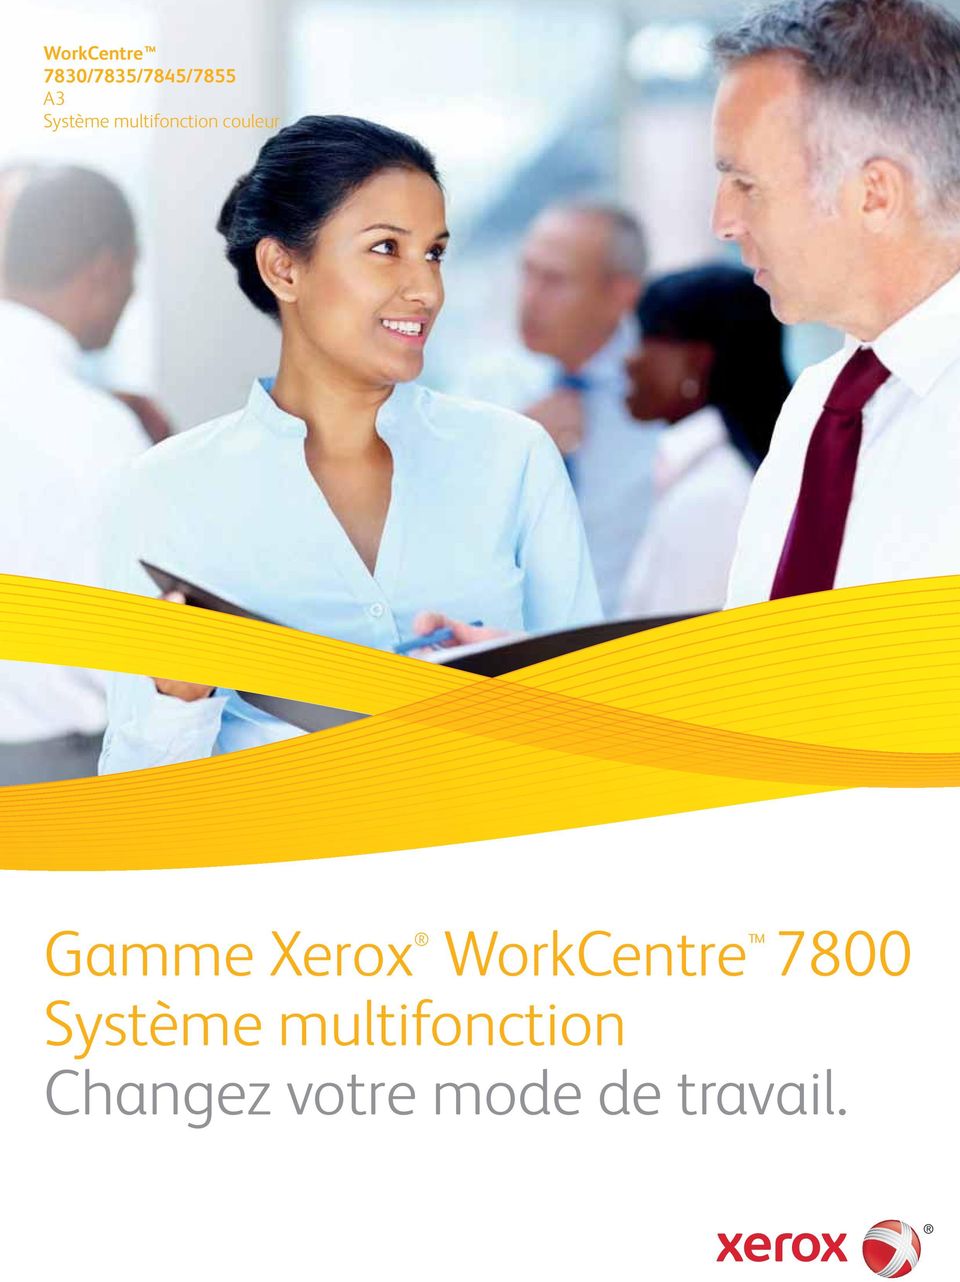 Xerox WorkCentre 7800 Système